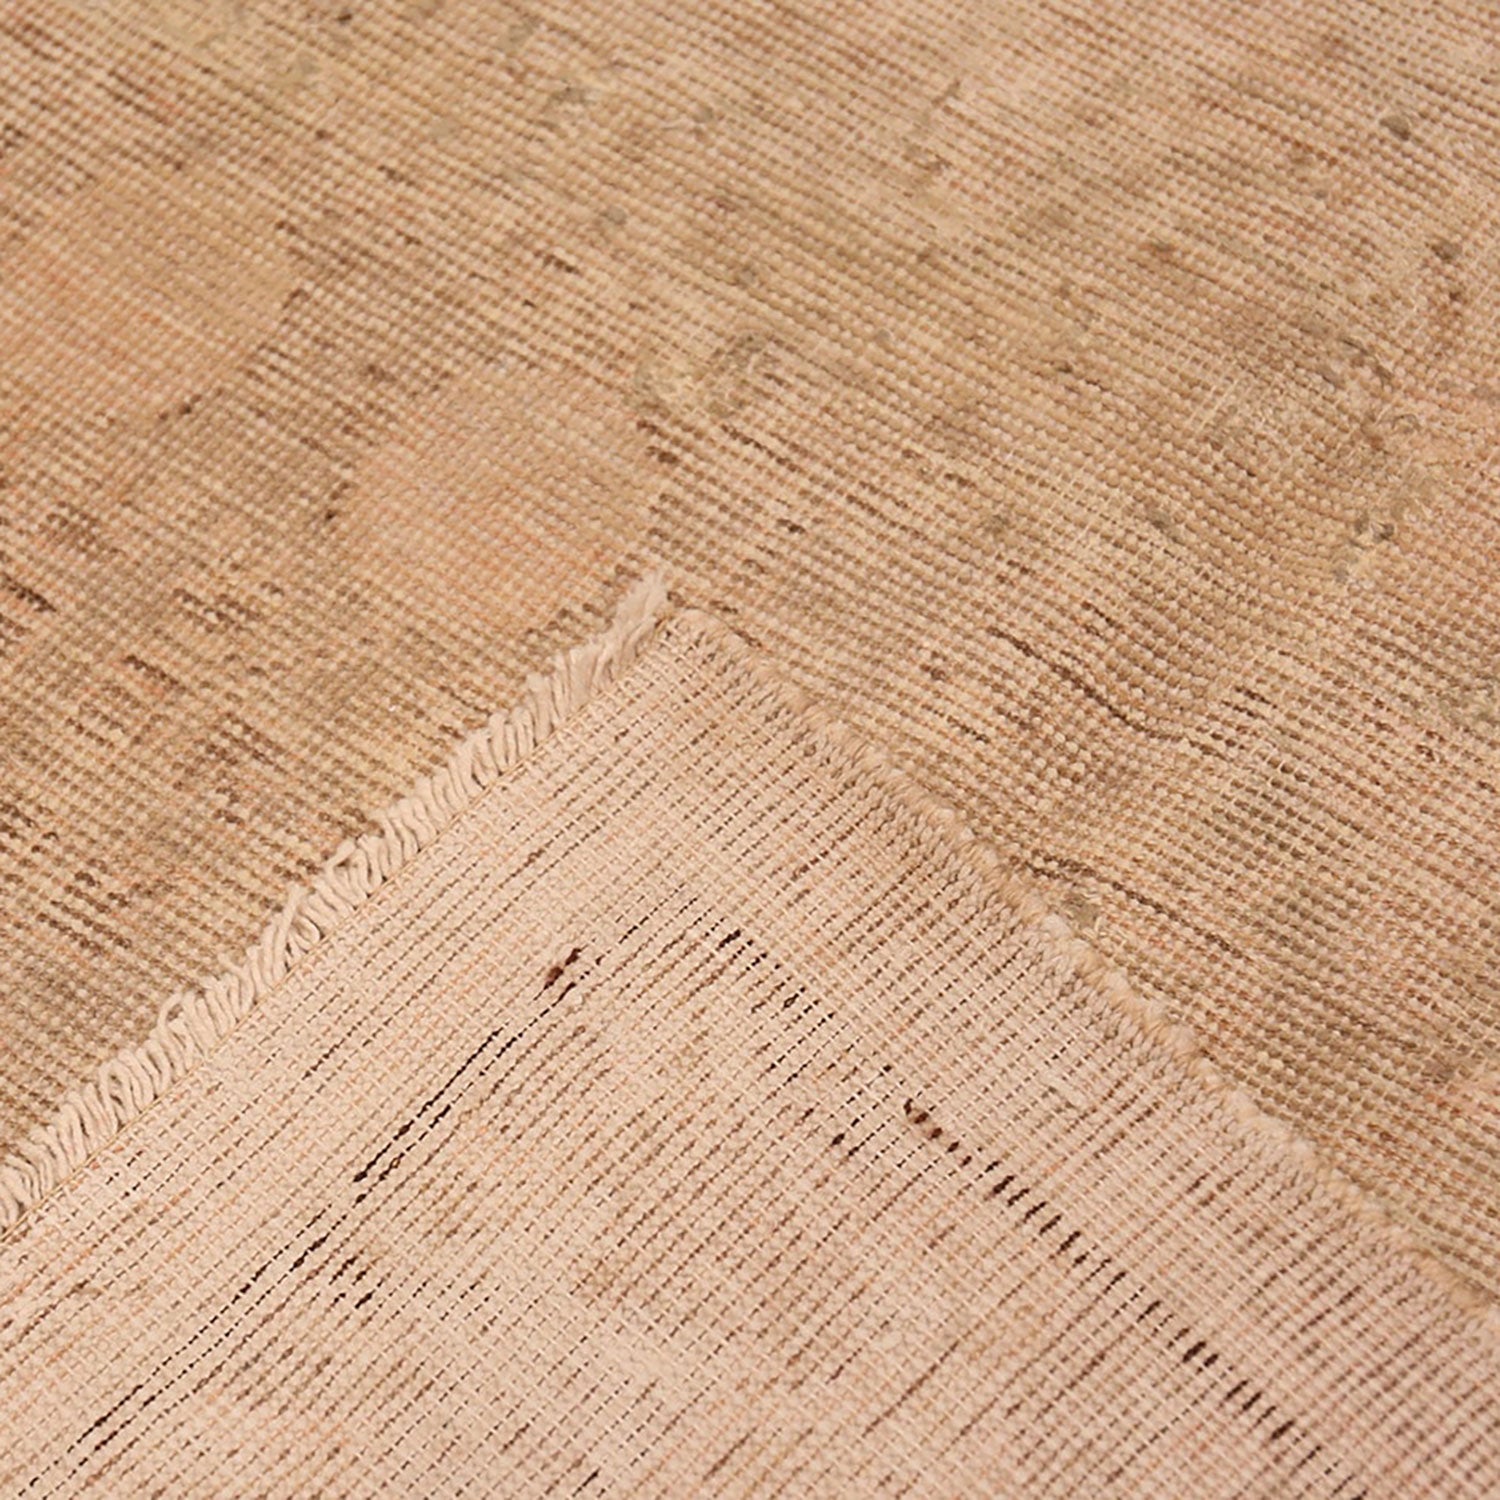 Close-up view of a woven fabric with visible threads and imperfections.